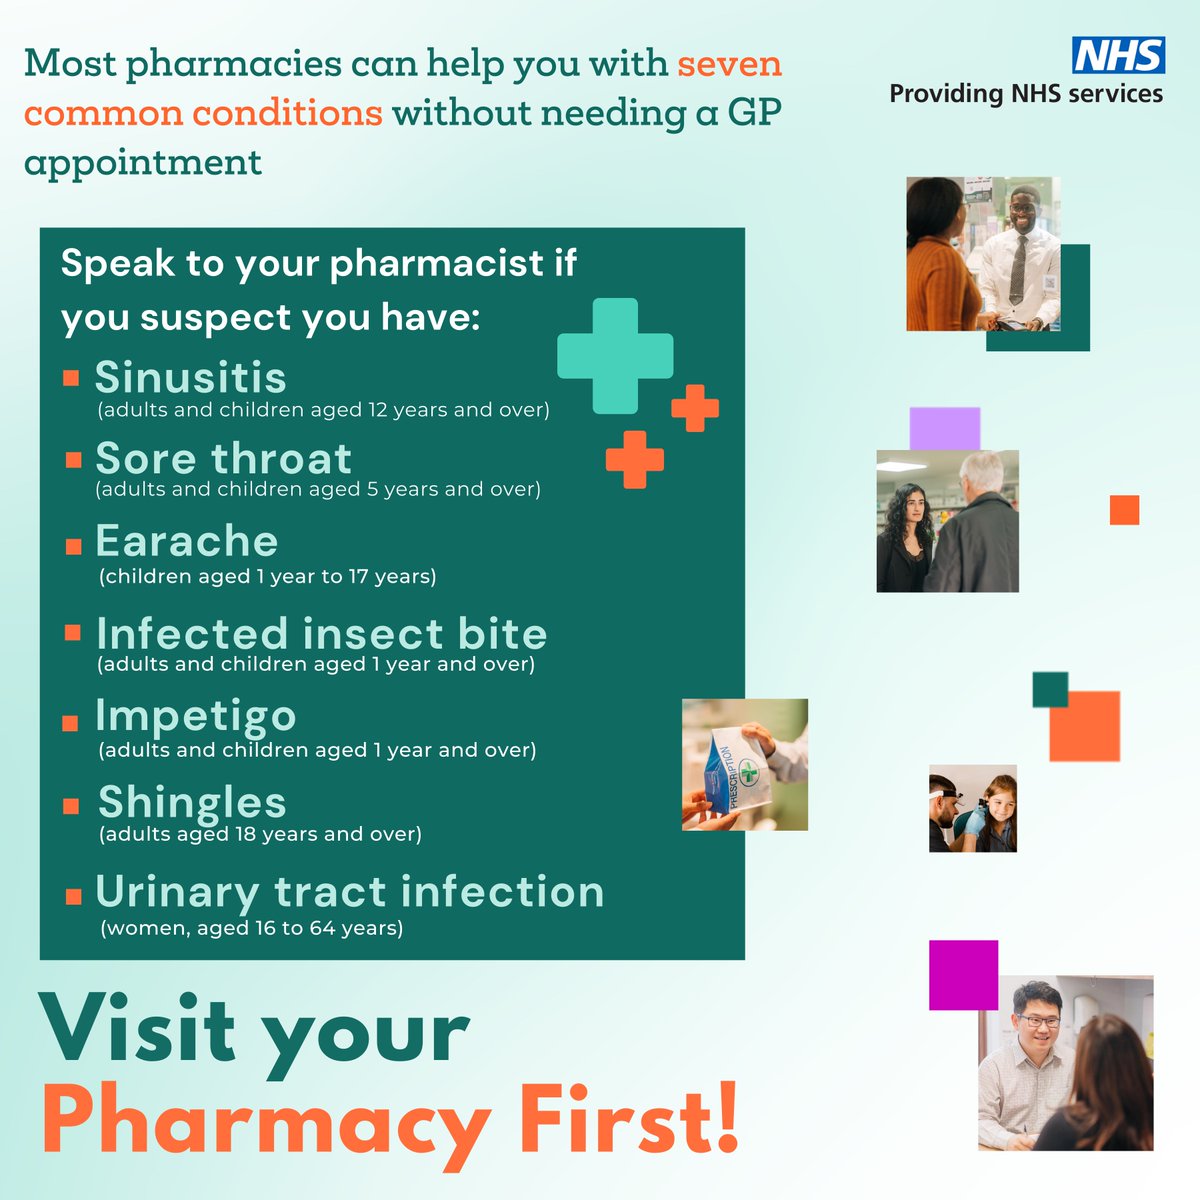 🆘🤔 Need healthcare advice? A NEW service #PharmacyFirst makes it easier to get help! Skip the morning rush to see a GP by visiting your pharmacy if you suspect you have one of seven minor conditions. 🔍 Find the service at a pharmacy near you: bit.ly/3vPV09F #NHS